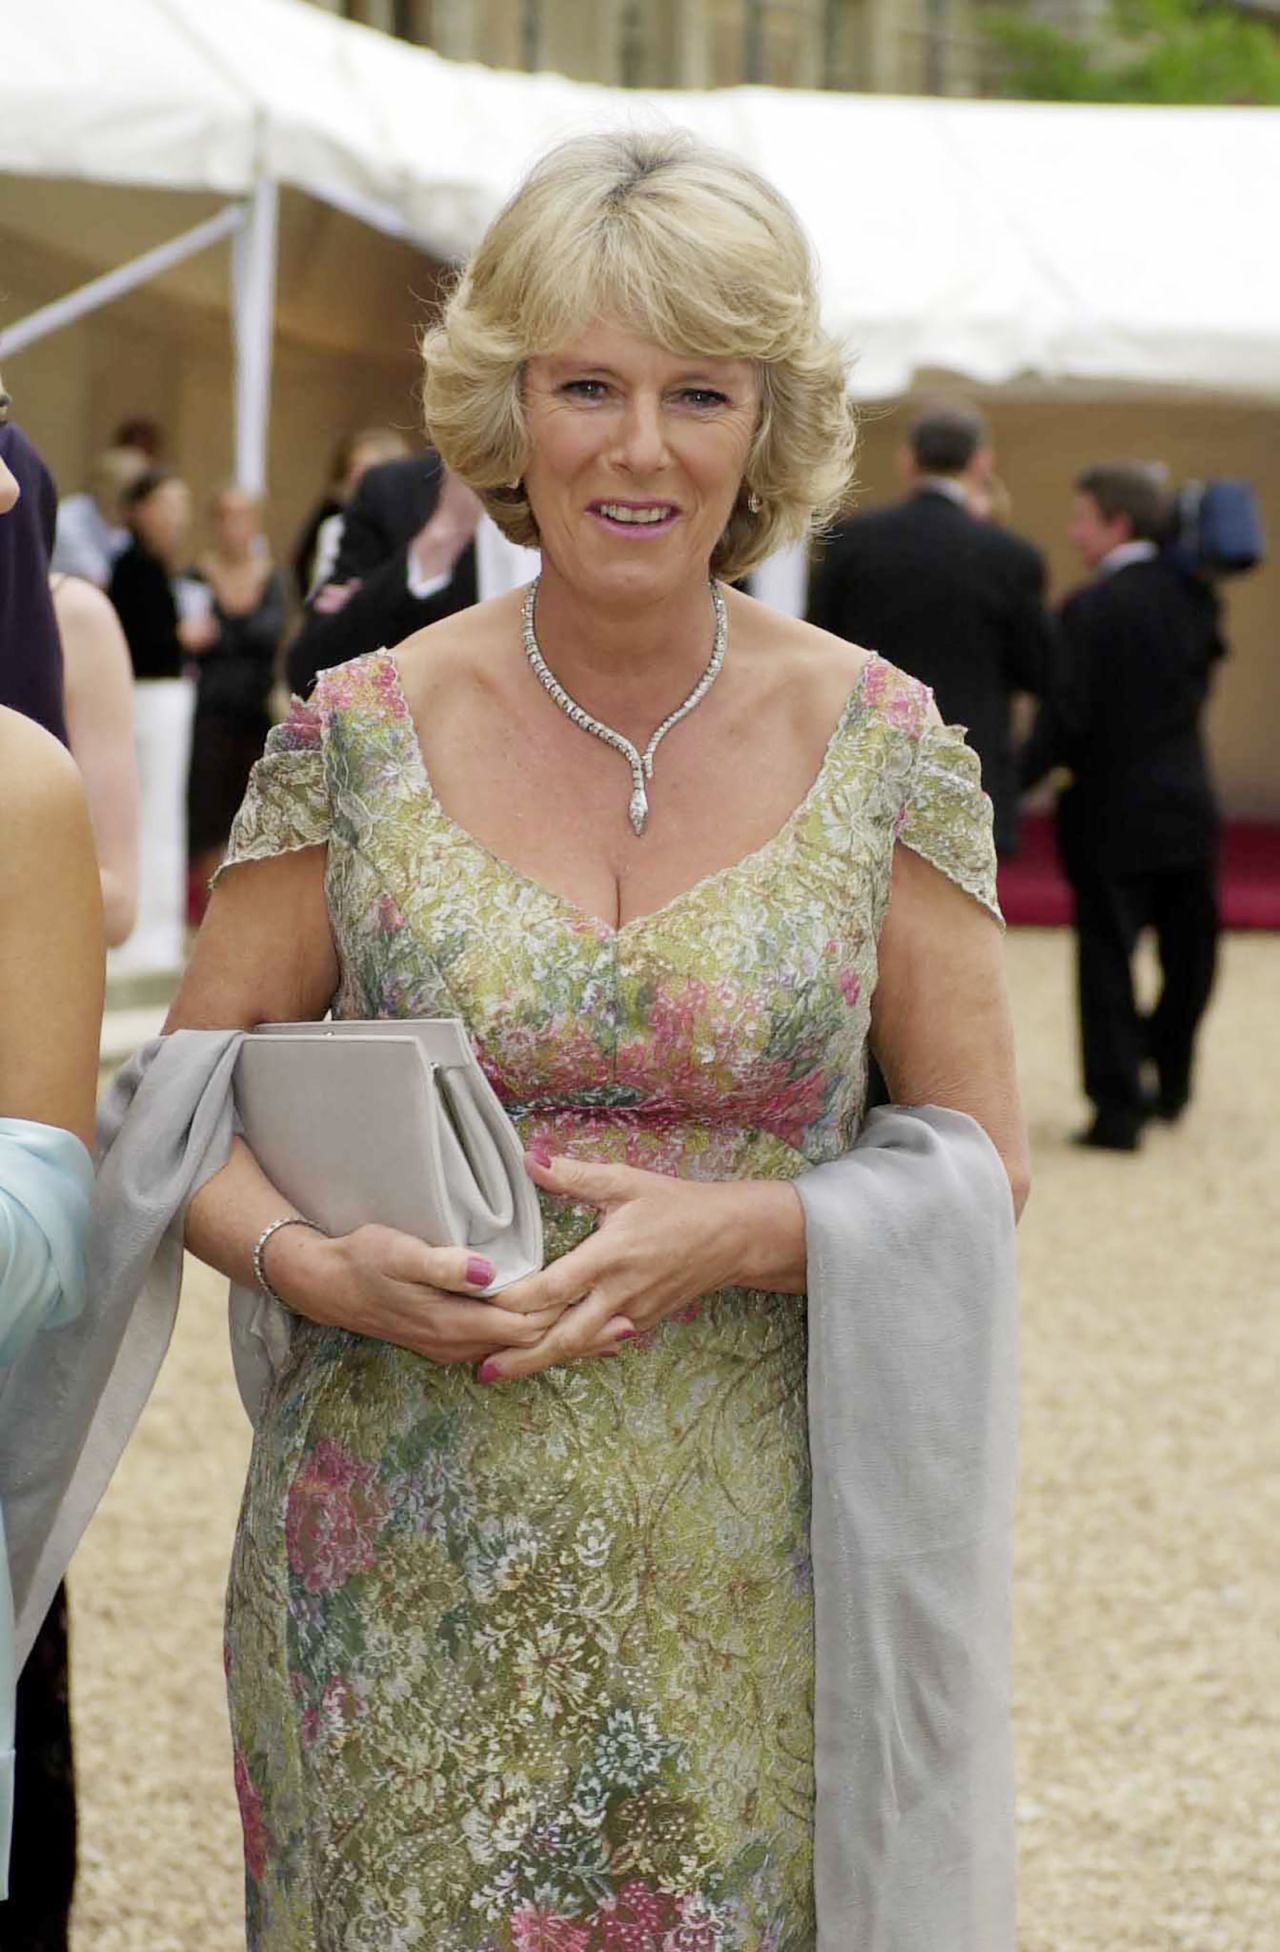 At a charity fashion gala hosted by Vogue for Macmillan Cancer Relief in 2001 at Waddesdon Manor, Buckinghamshire, Camilla arrived in a bold jacquard gown in an elegant watercolor print.